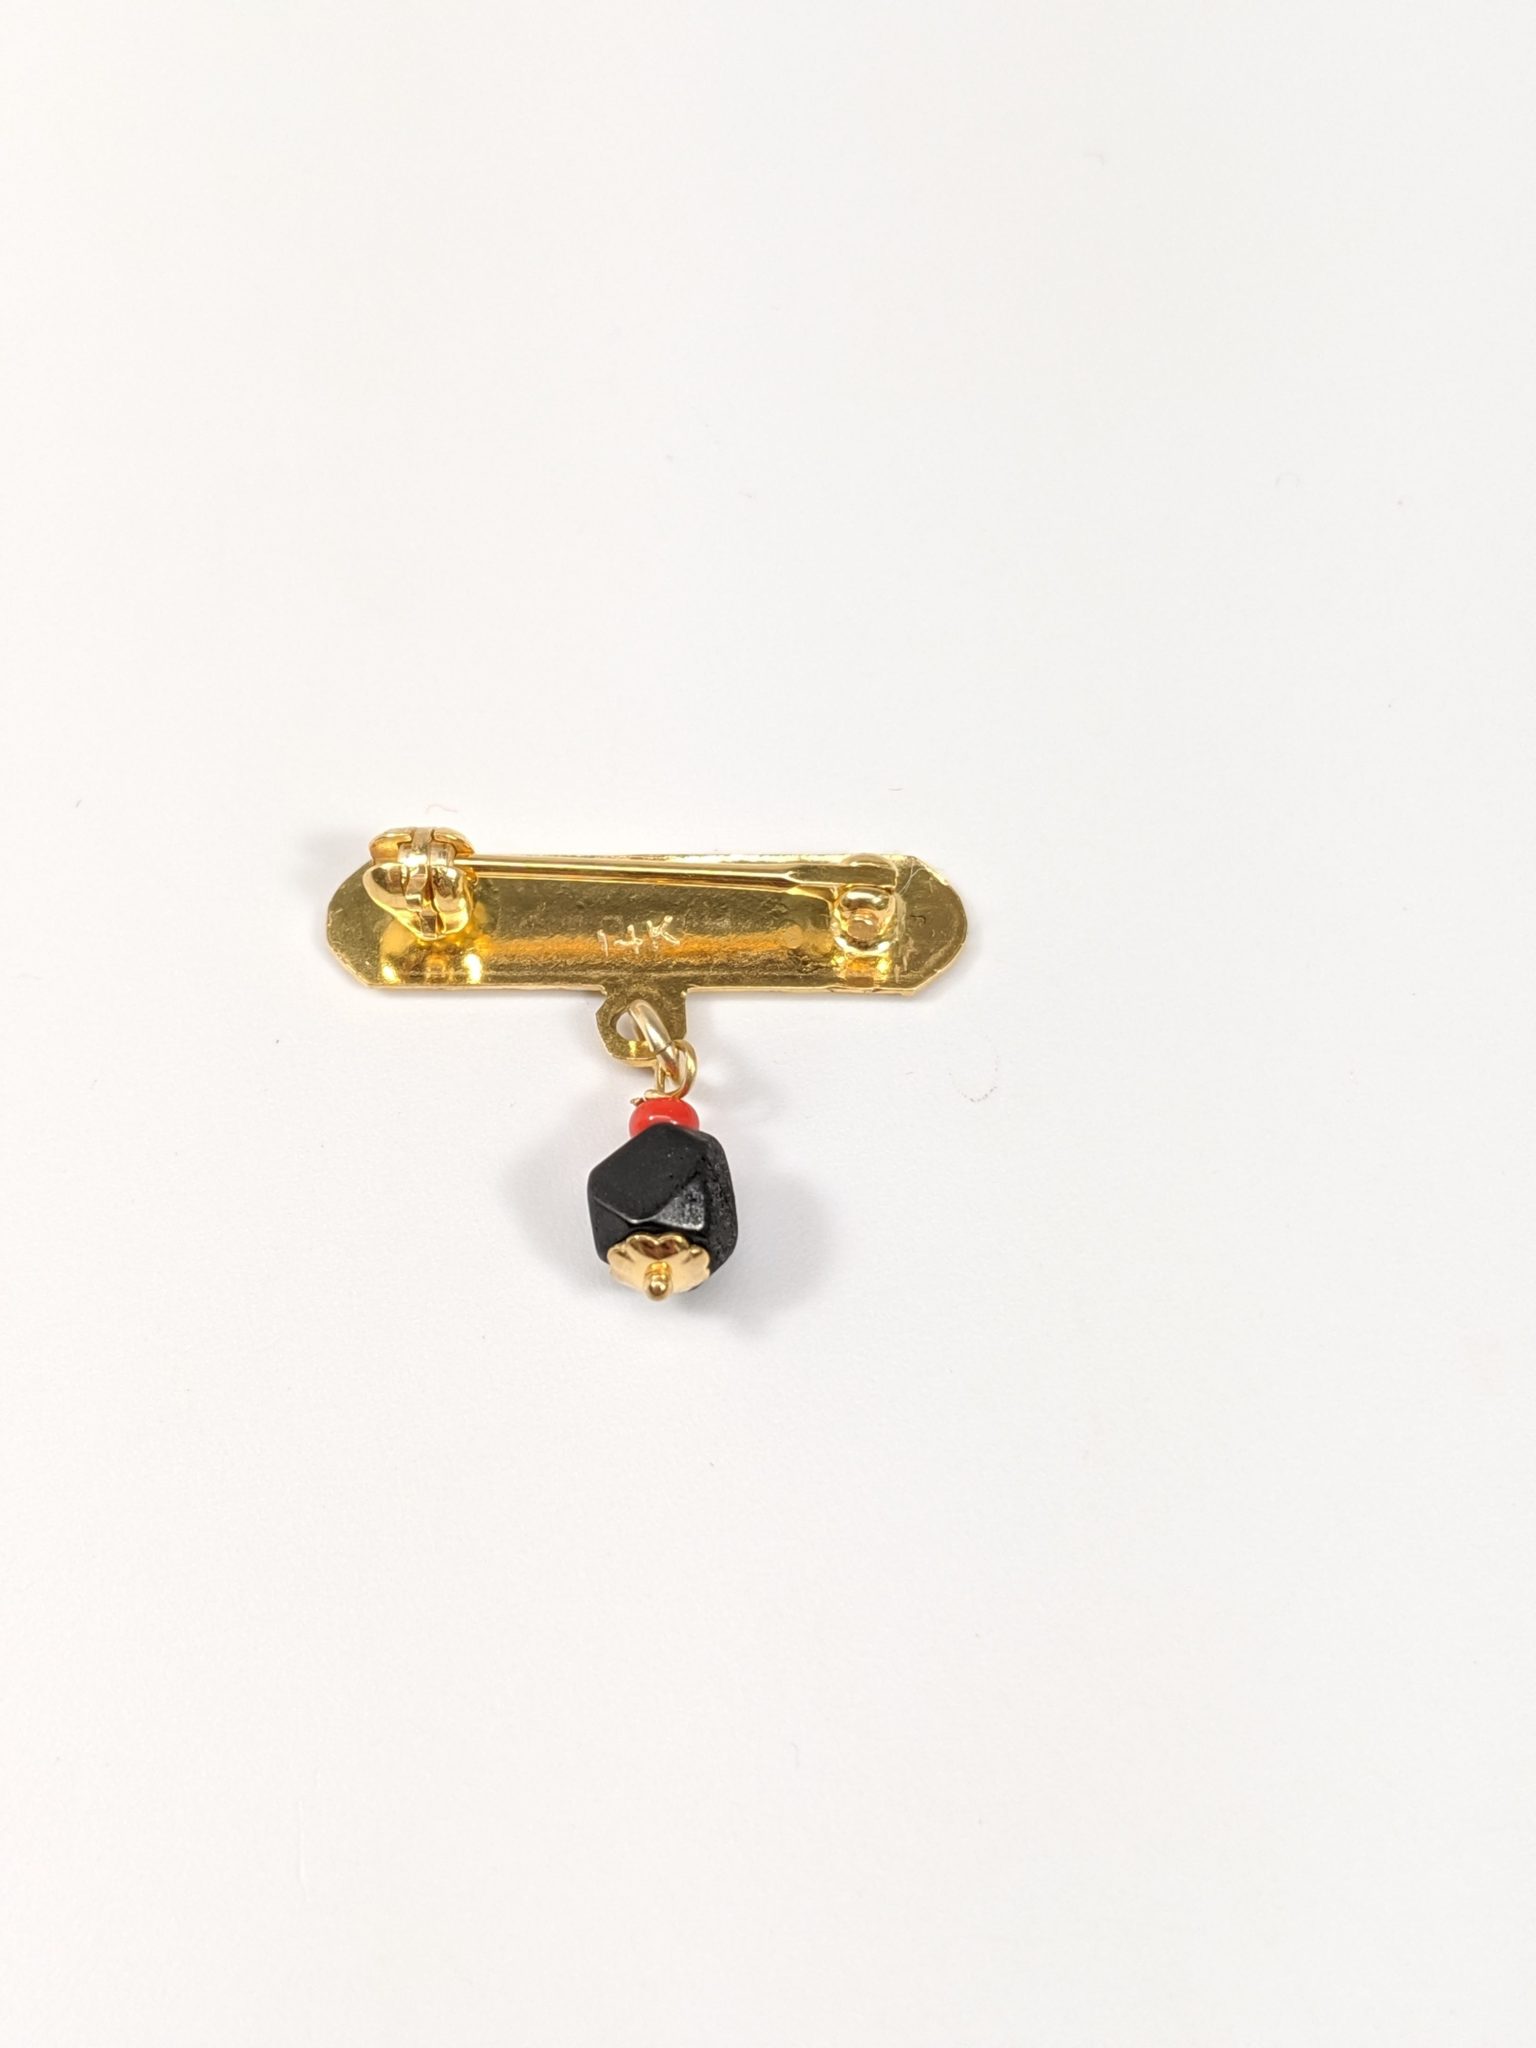 14K Yellow Gold "God Bless Me" Pin Brooch With Hanging Genuine Black Azabache and Red Coral Back Side